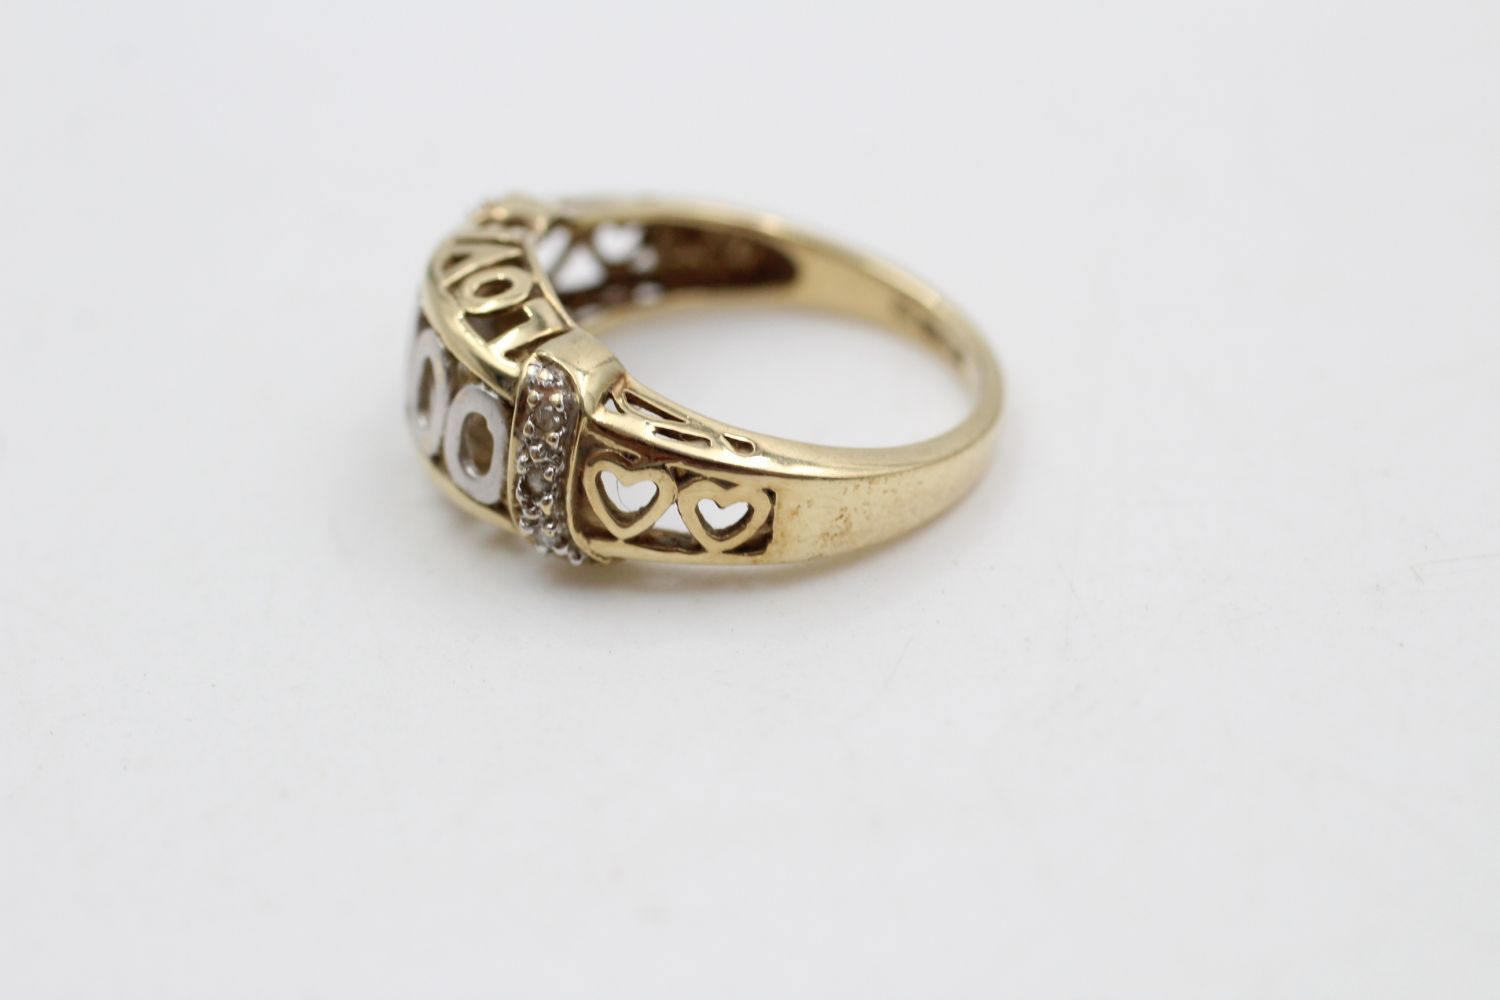 vintage 9ct gold two-tone '2000' cutwork ring 2.3 grams gross - Image 3 of 5